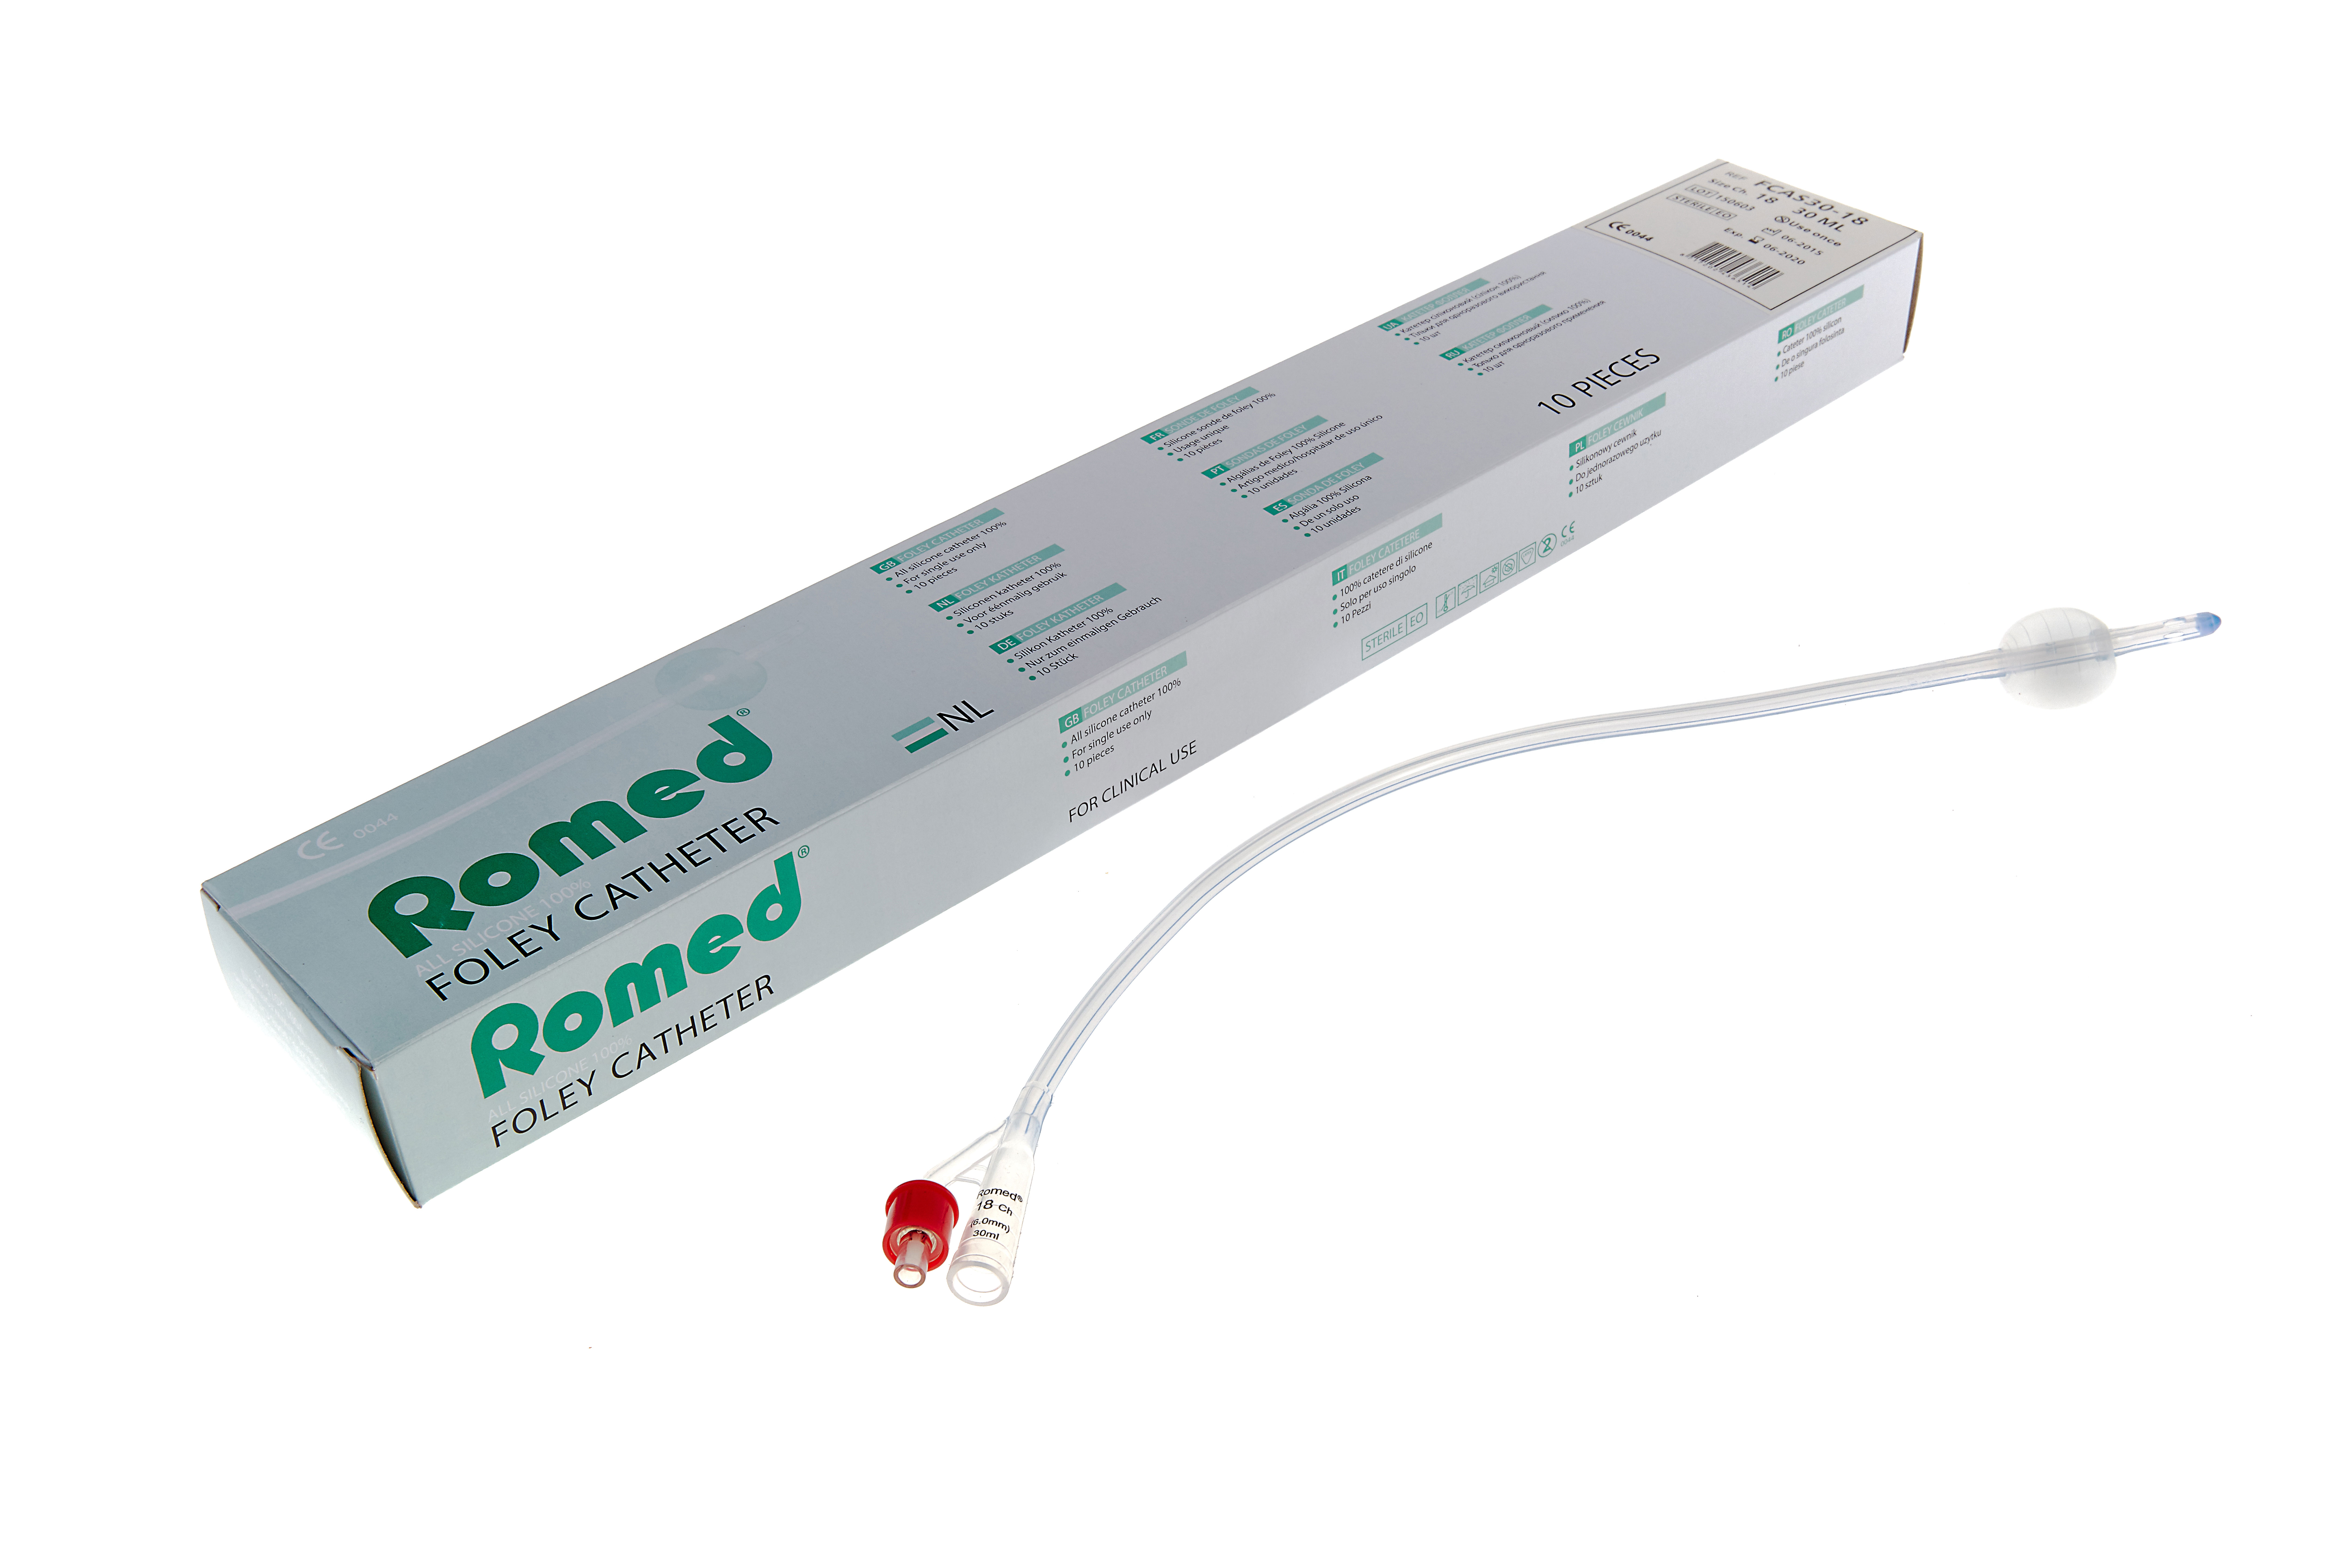 FCAS10-16 Romed Foley balloon catheters 2-way, ch. 16, all silicone, 10ml, sterile per piece, per 10 pcs in an inner box, 10 x 10 pcs = 100 pcs in a carton.